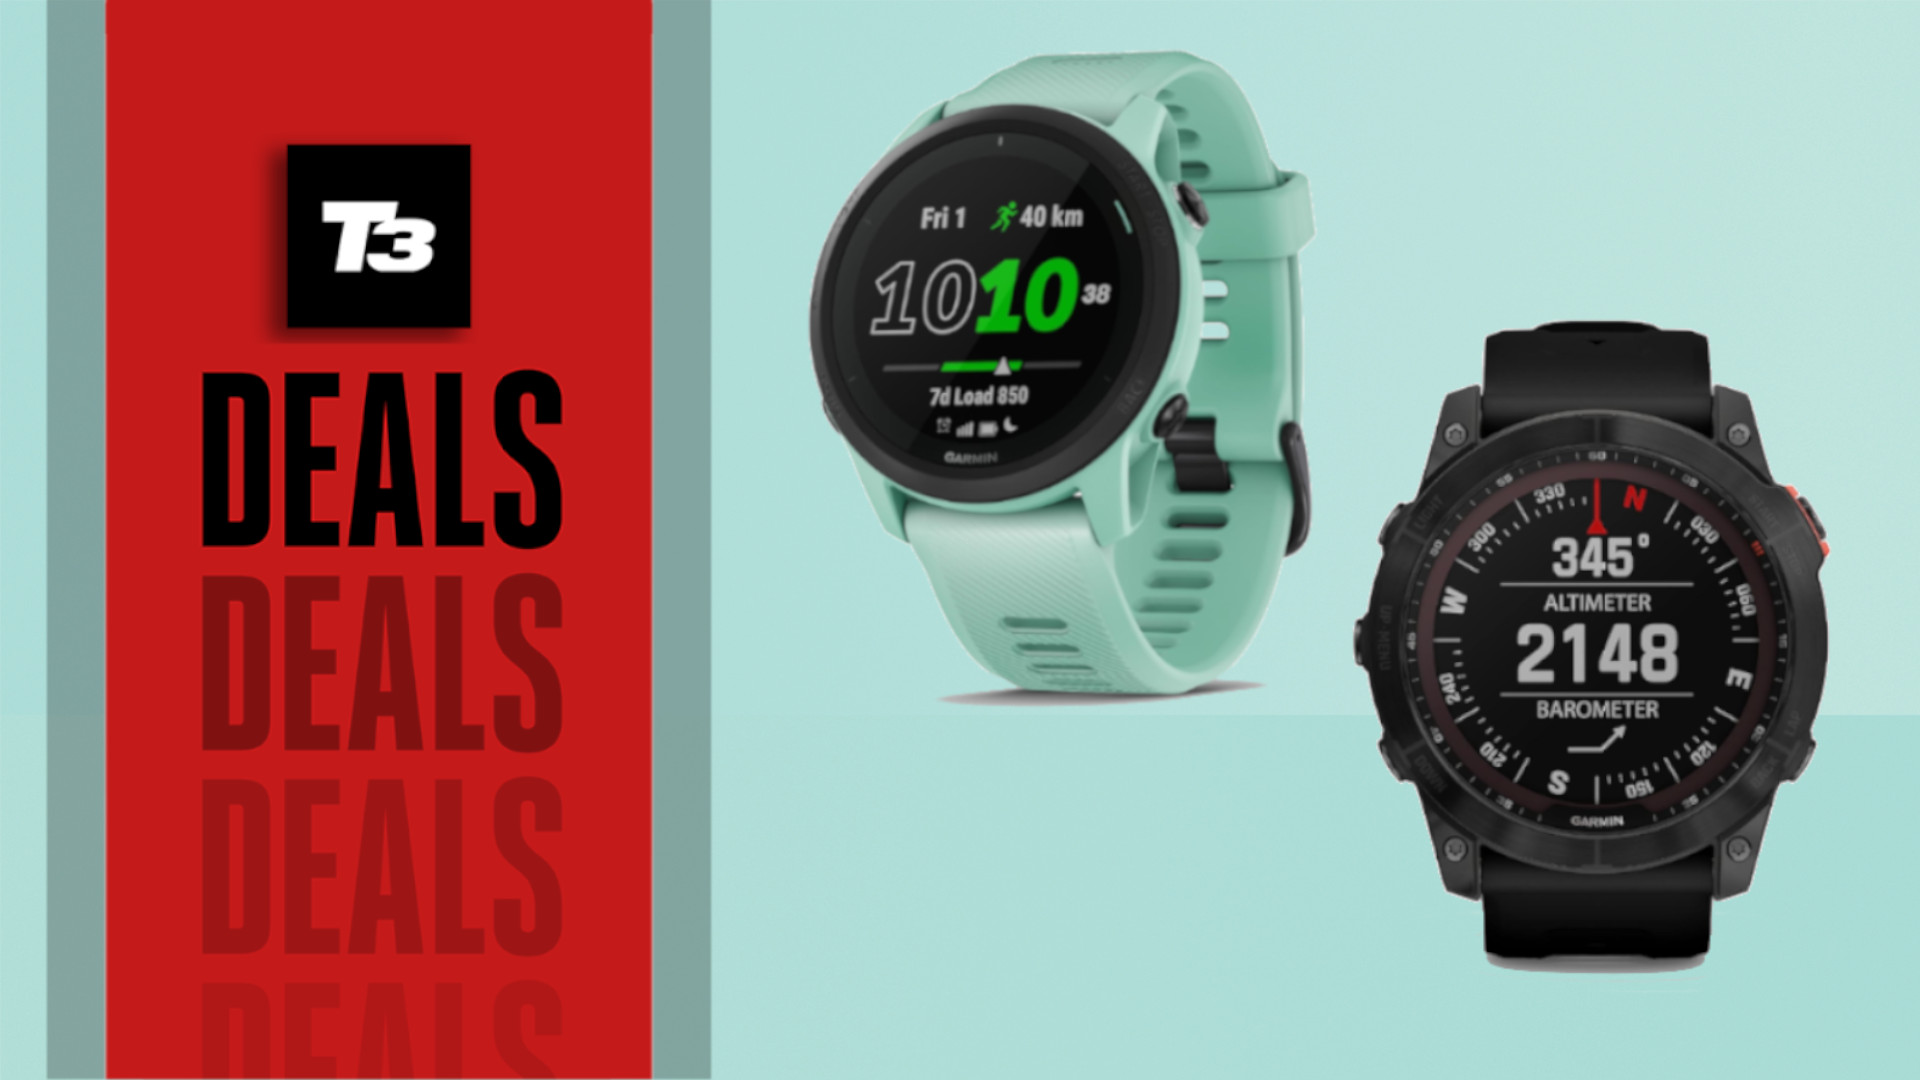 There’s a Garmin sale with up to 47% off – 3 deals I’d buy right now